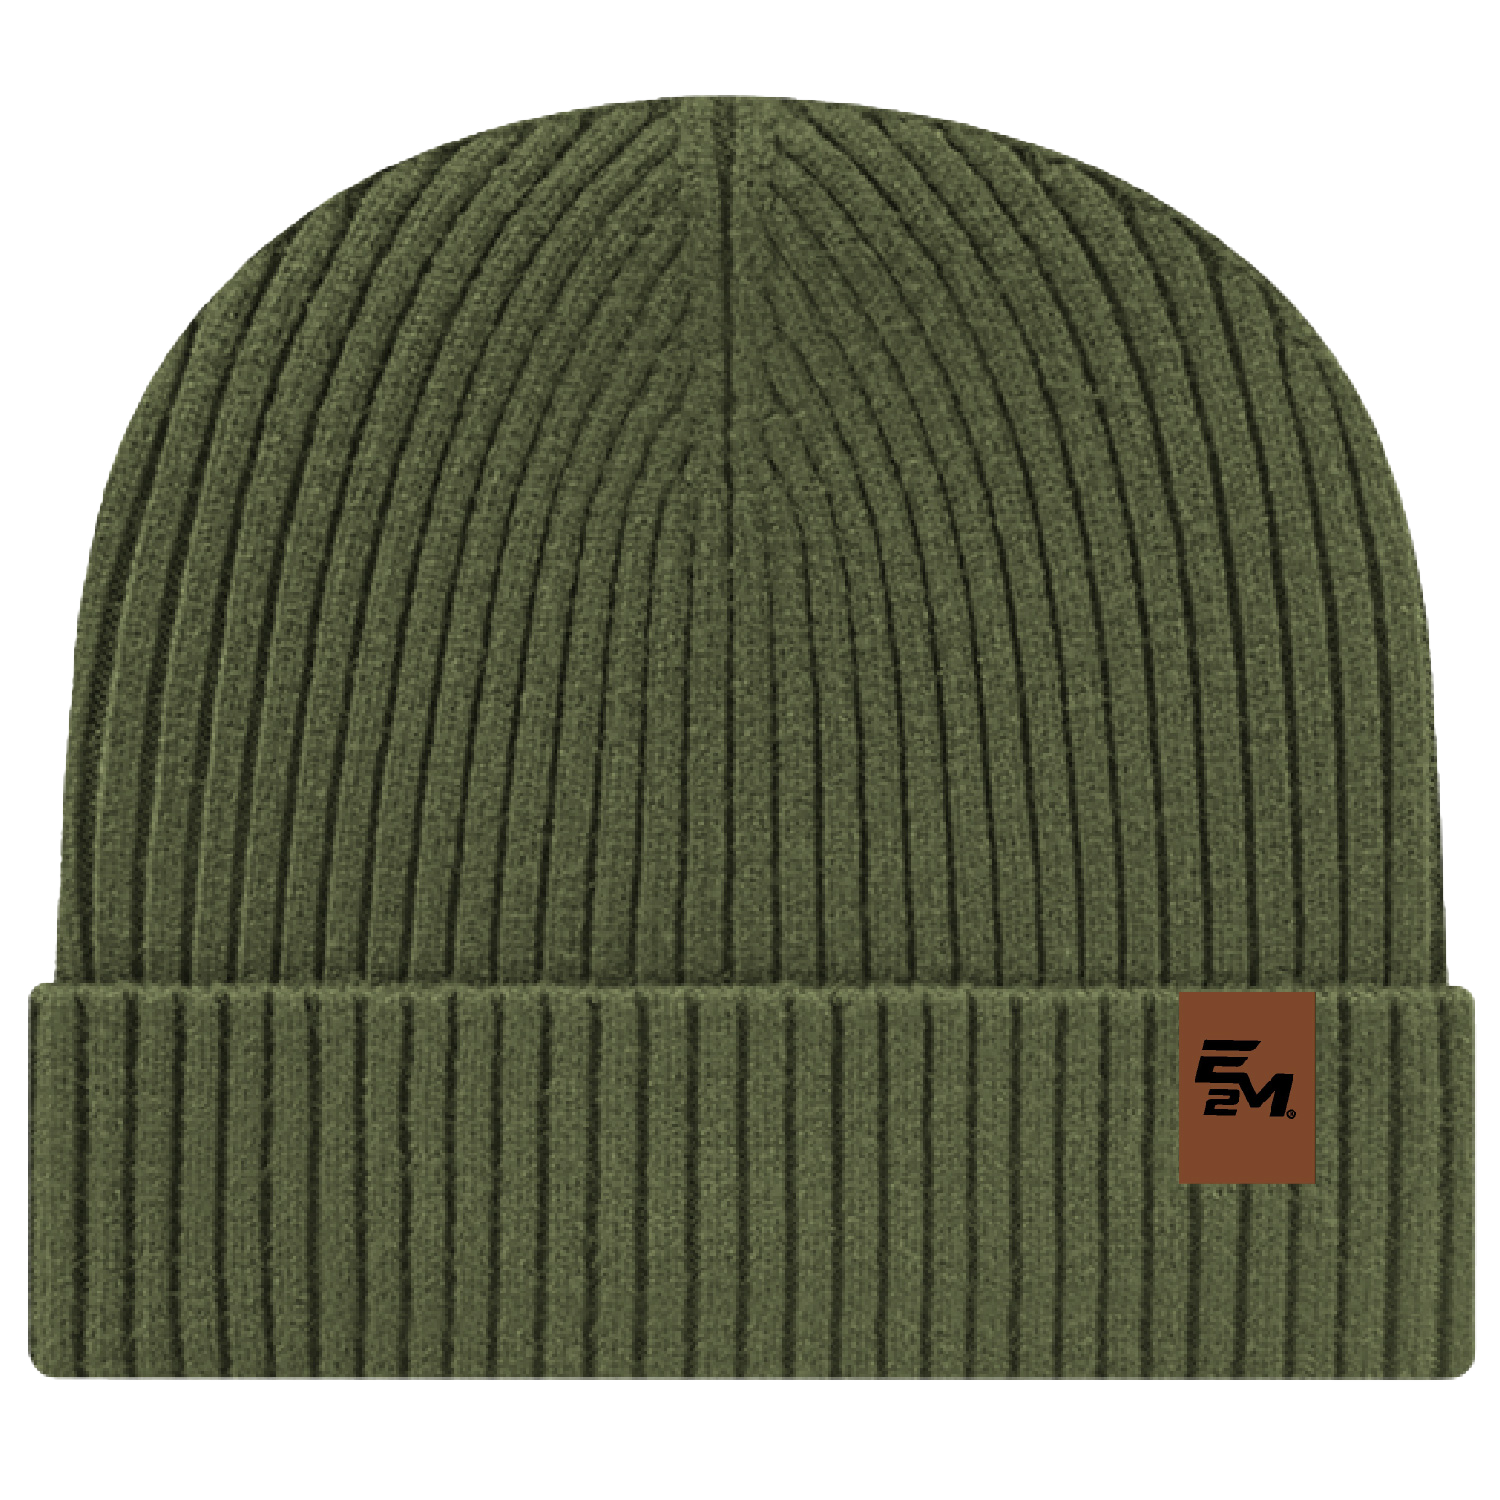 E2M -Green Knit Beanie product image